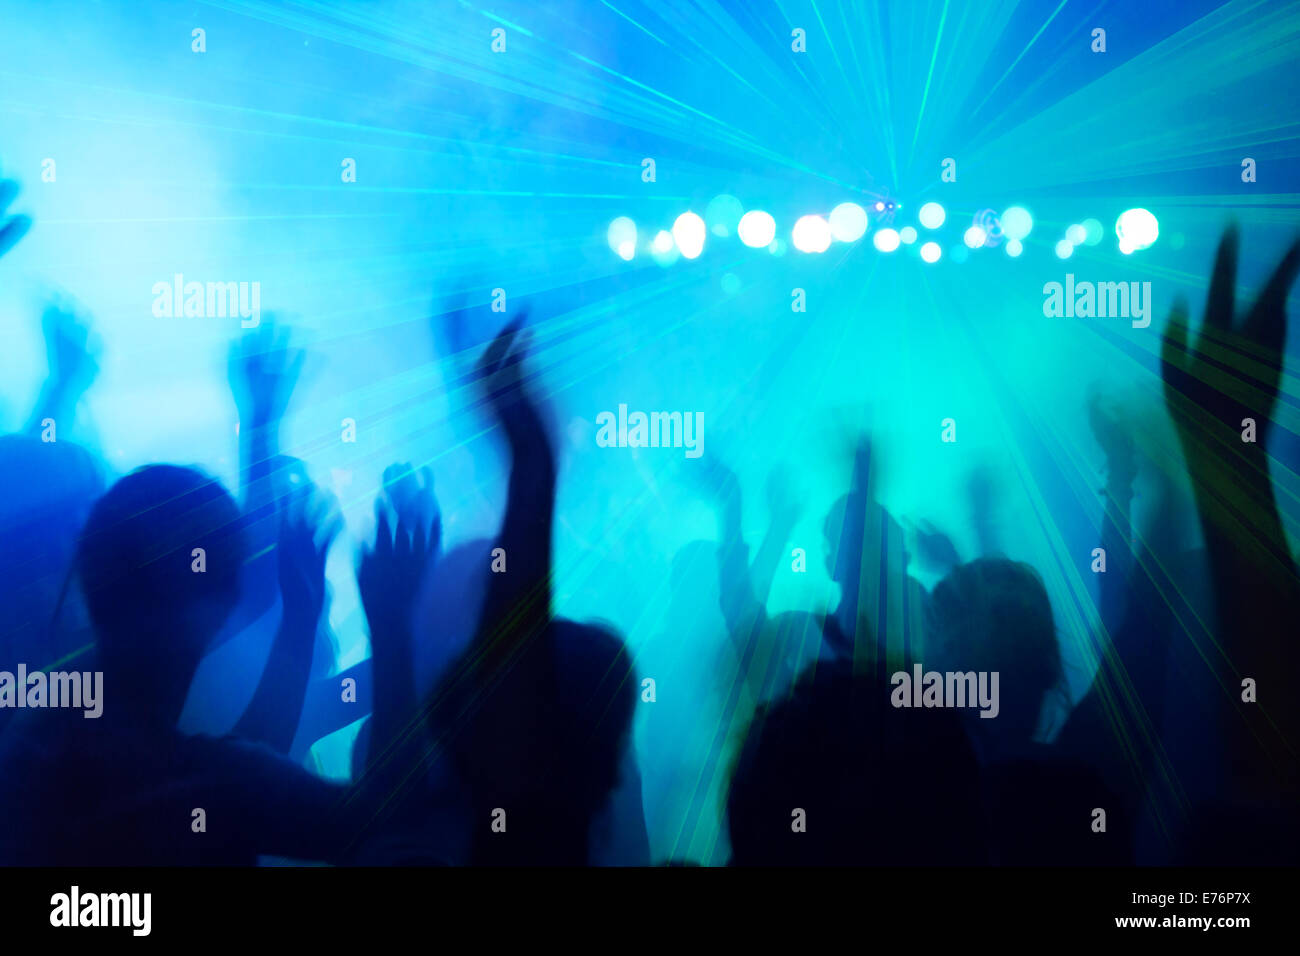 People silhouettes dancing to the disco beat. Stock Photo